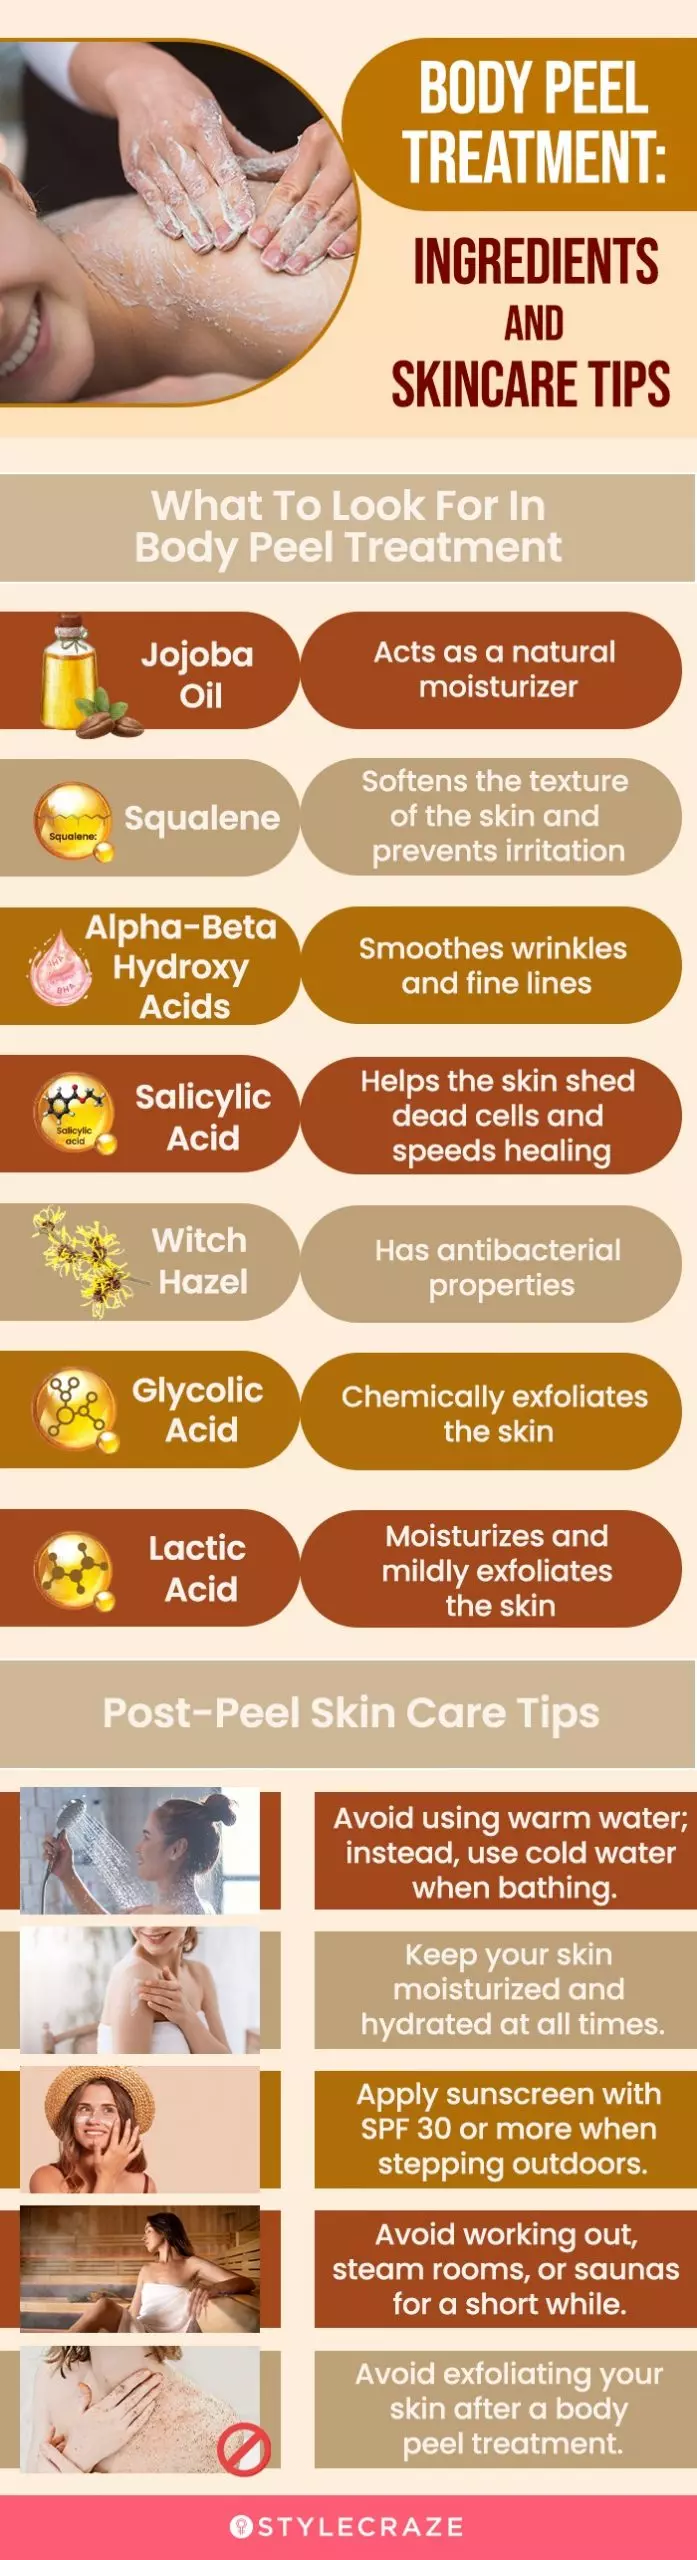 Body Peel Treatment: Ingredients To Look For And Post-Peel Skin Care Tips (infographic)